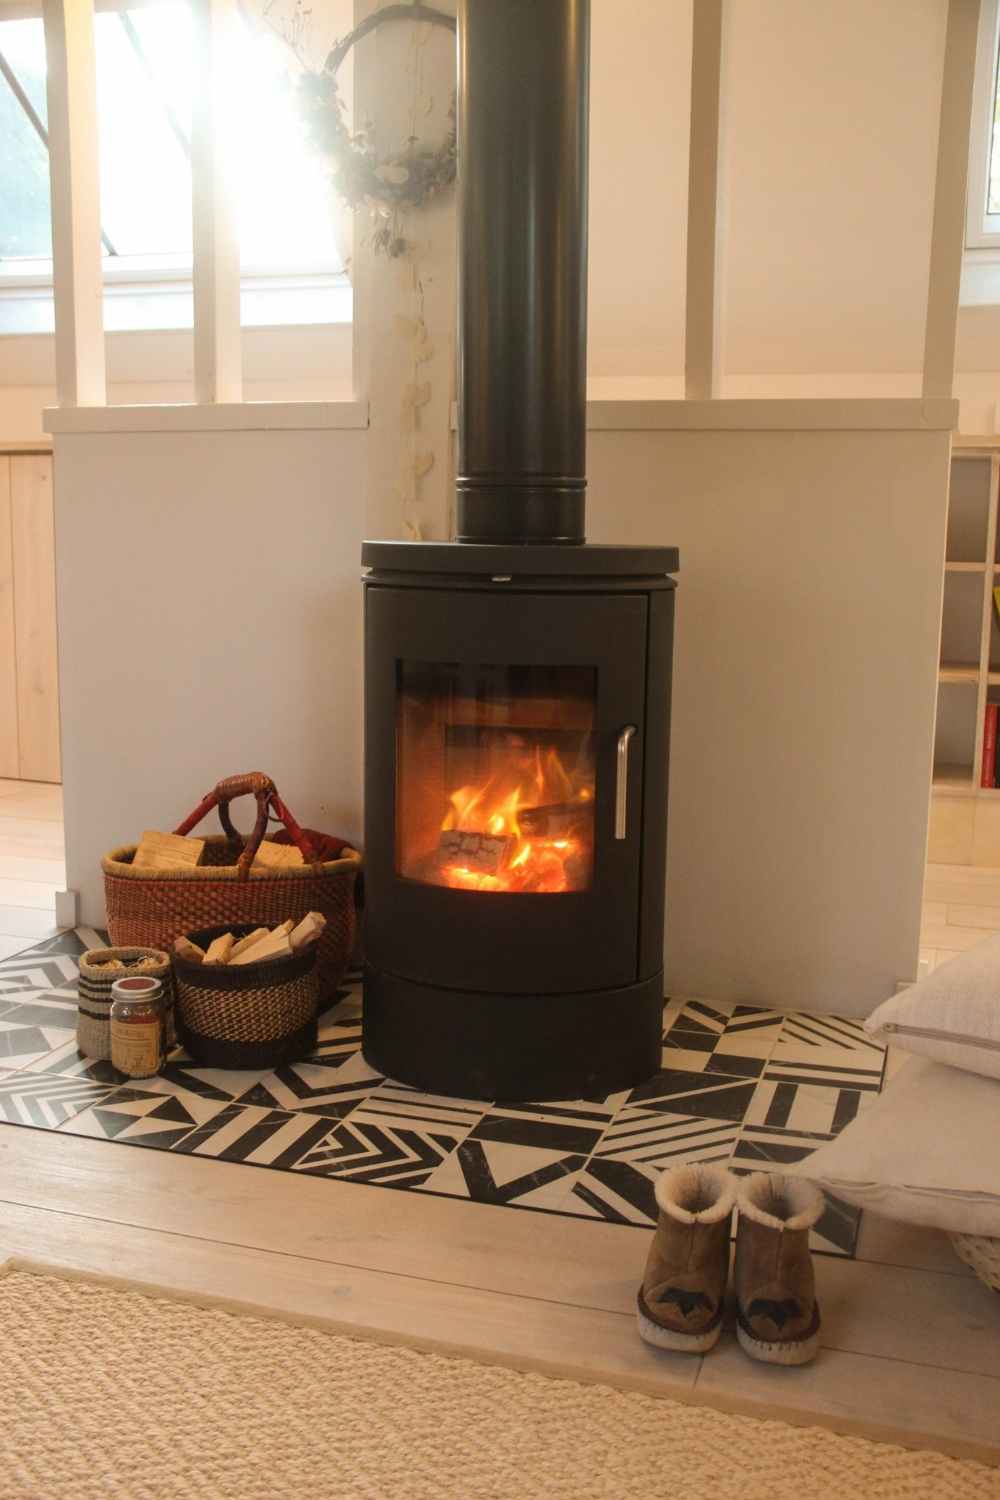 The woodburner keeps the space cosy on chilly days